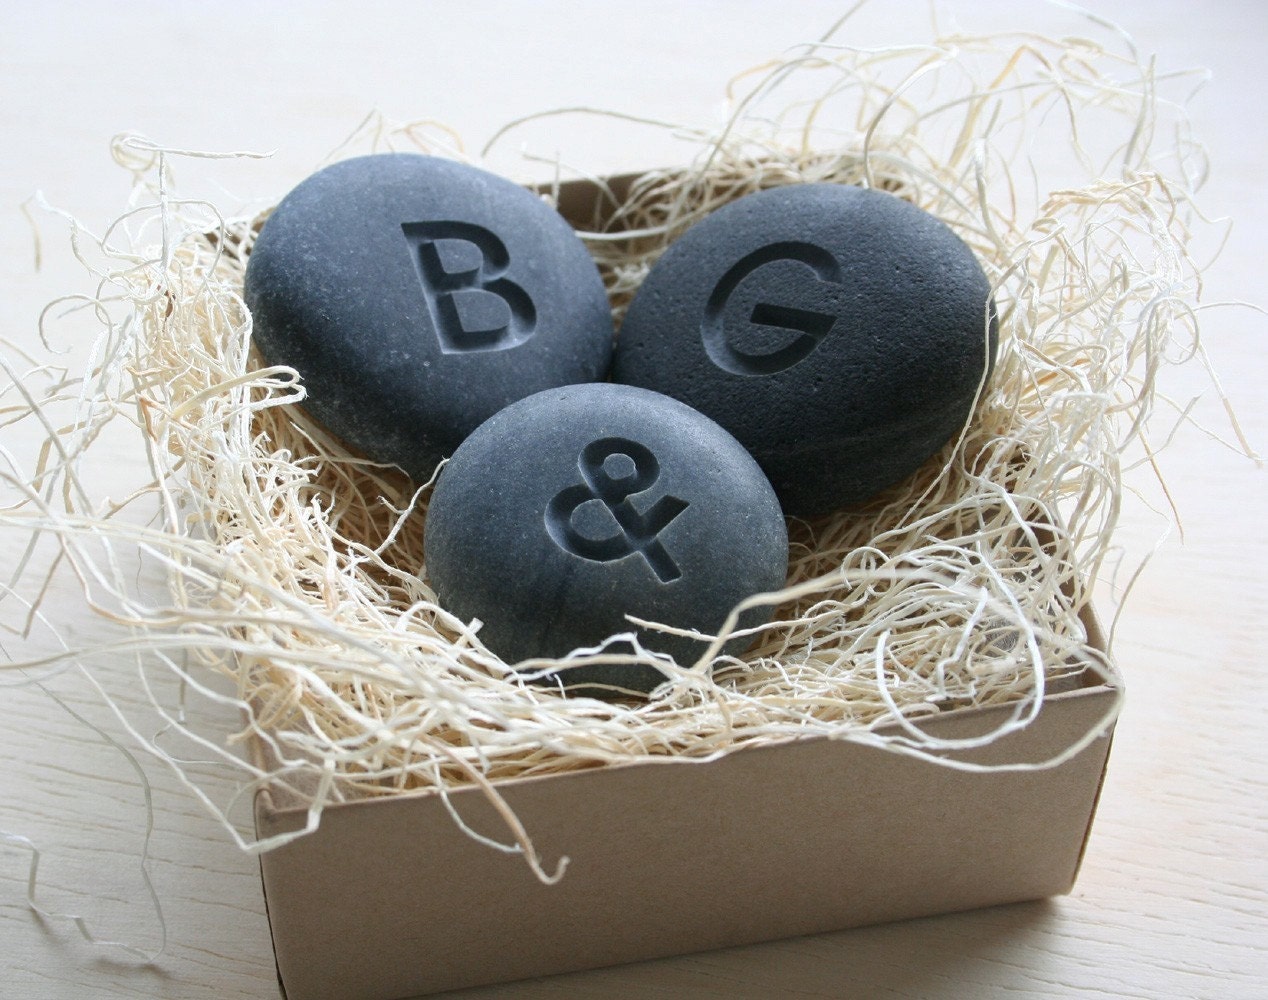 Petite love stones - set of 3 personalized initial pebbles by sjEngraving